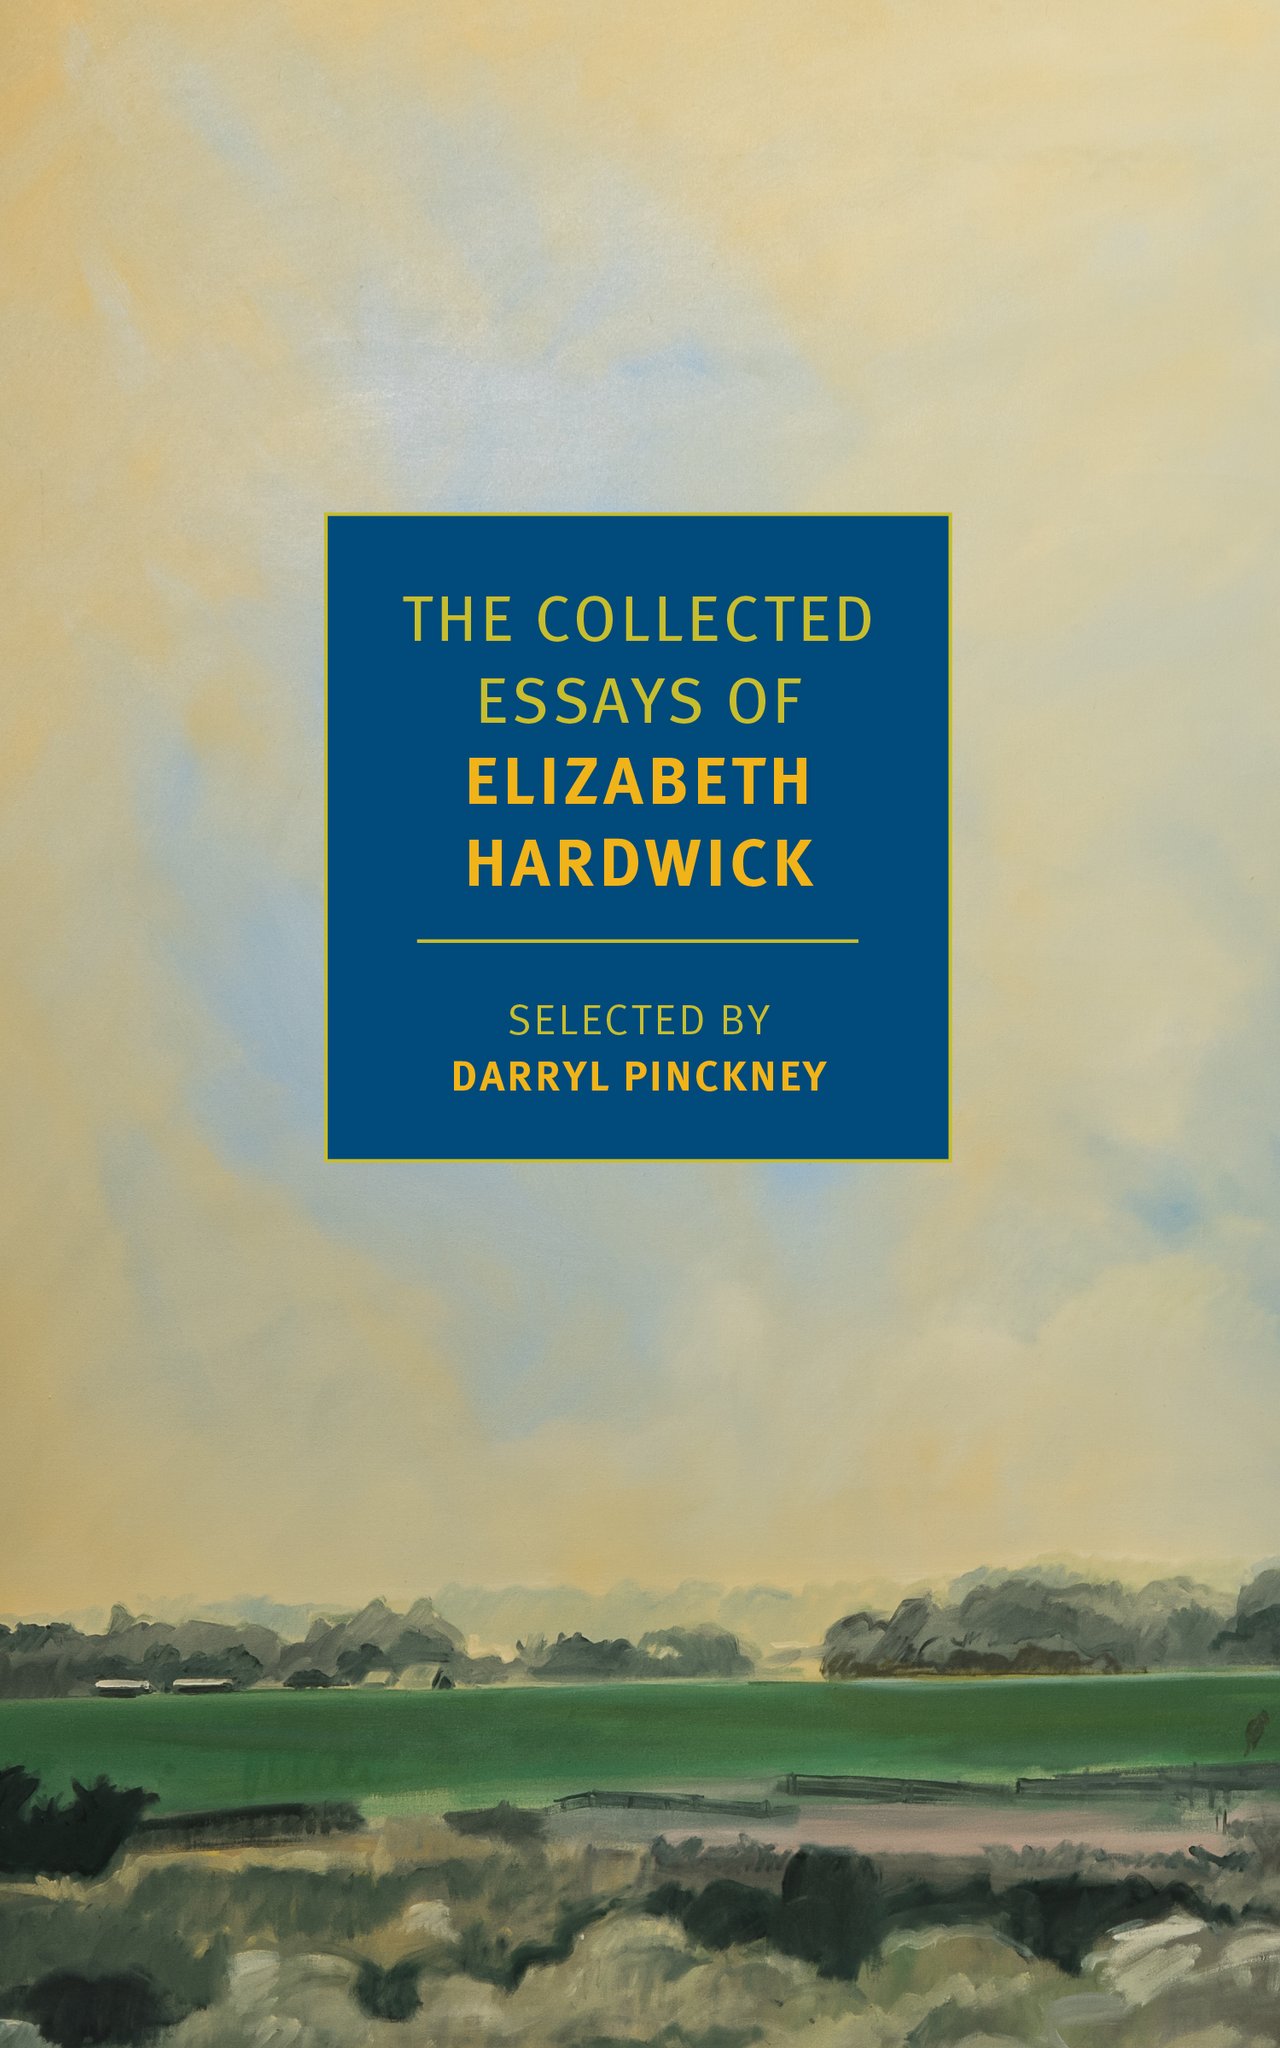 Elizabeth Hardwick: Collected Essays (New York Review Books, 2017)